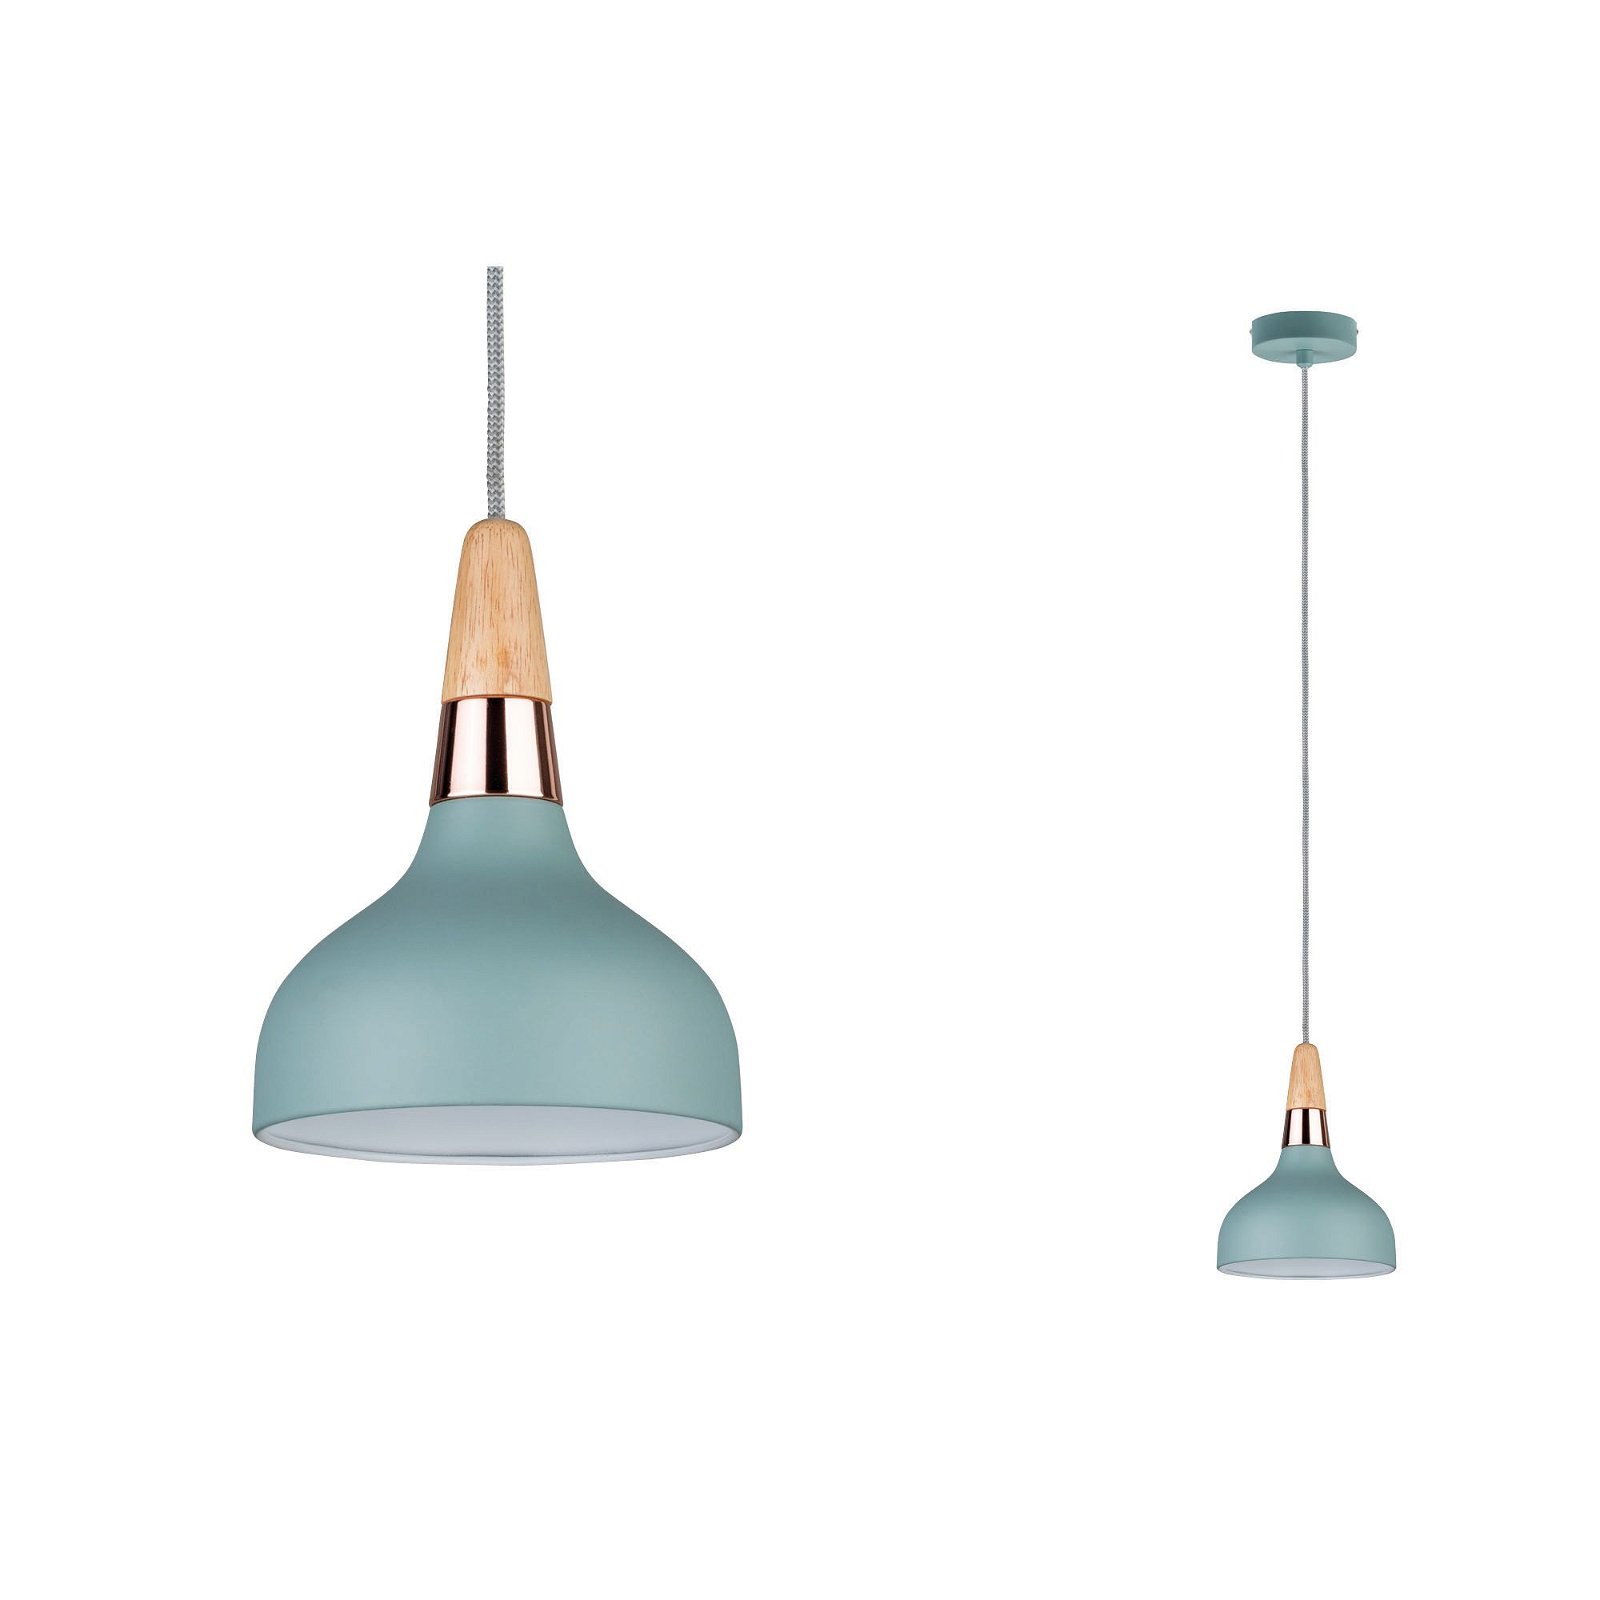 Neordic Pendant luminaire Juna E14 max. 20W Soft green/Copper/Wood dimmable Metal/Wood